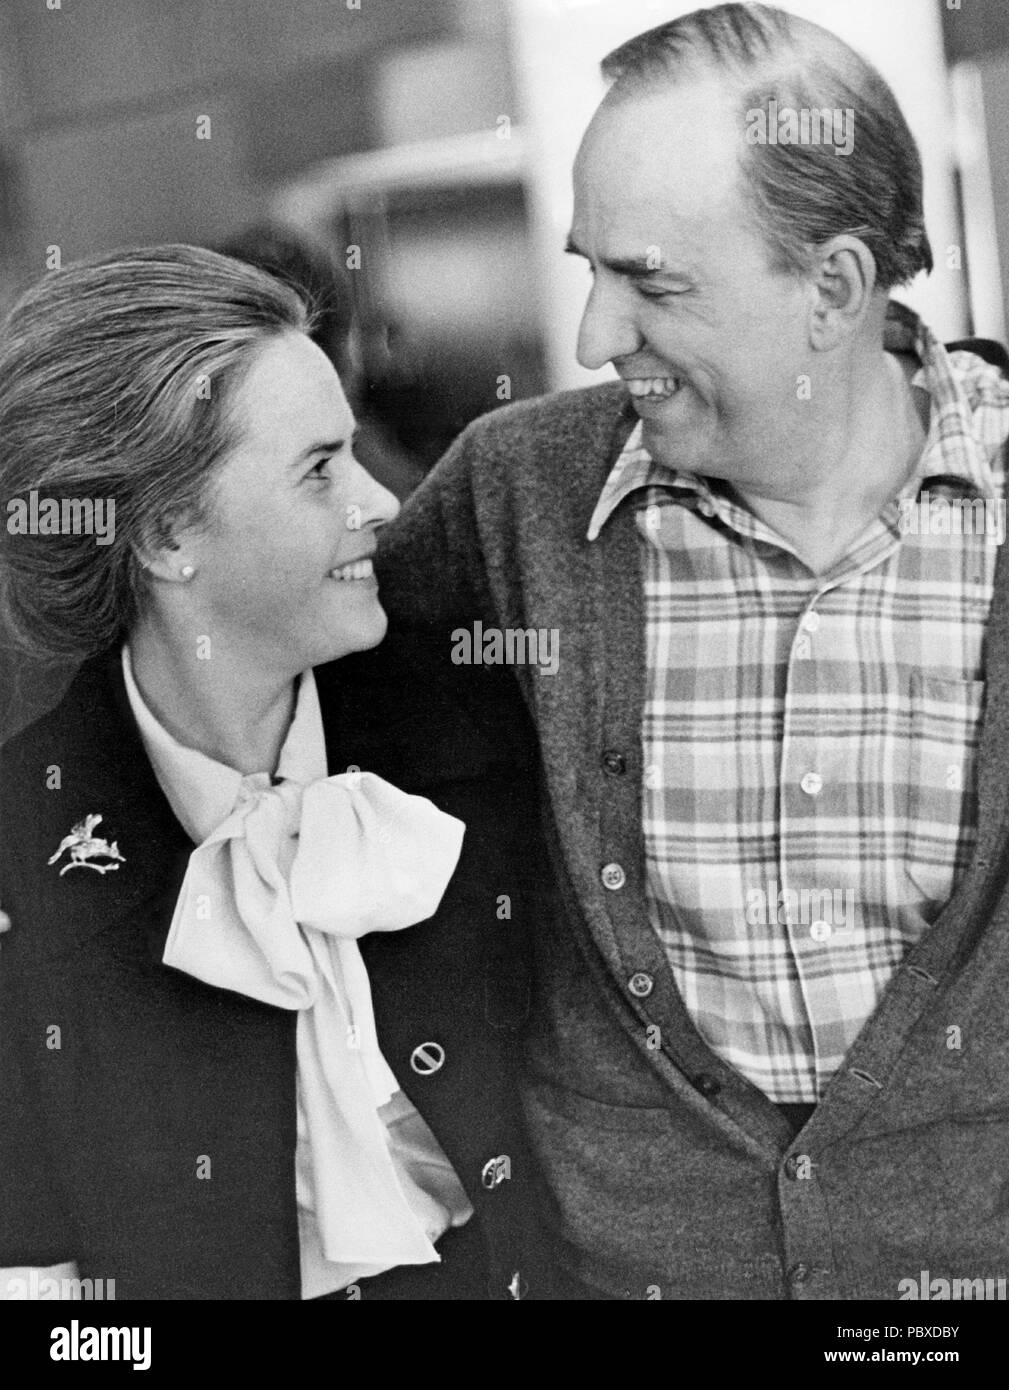 Ingmar Bergman. 1918-2007. Swedish film director. Pictured here in Oslo  Norway 1977 in connection with the presentation of his film Autumn Sonata  which he wrote and directed. Here together with his wife